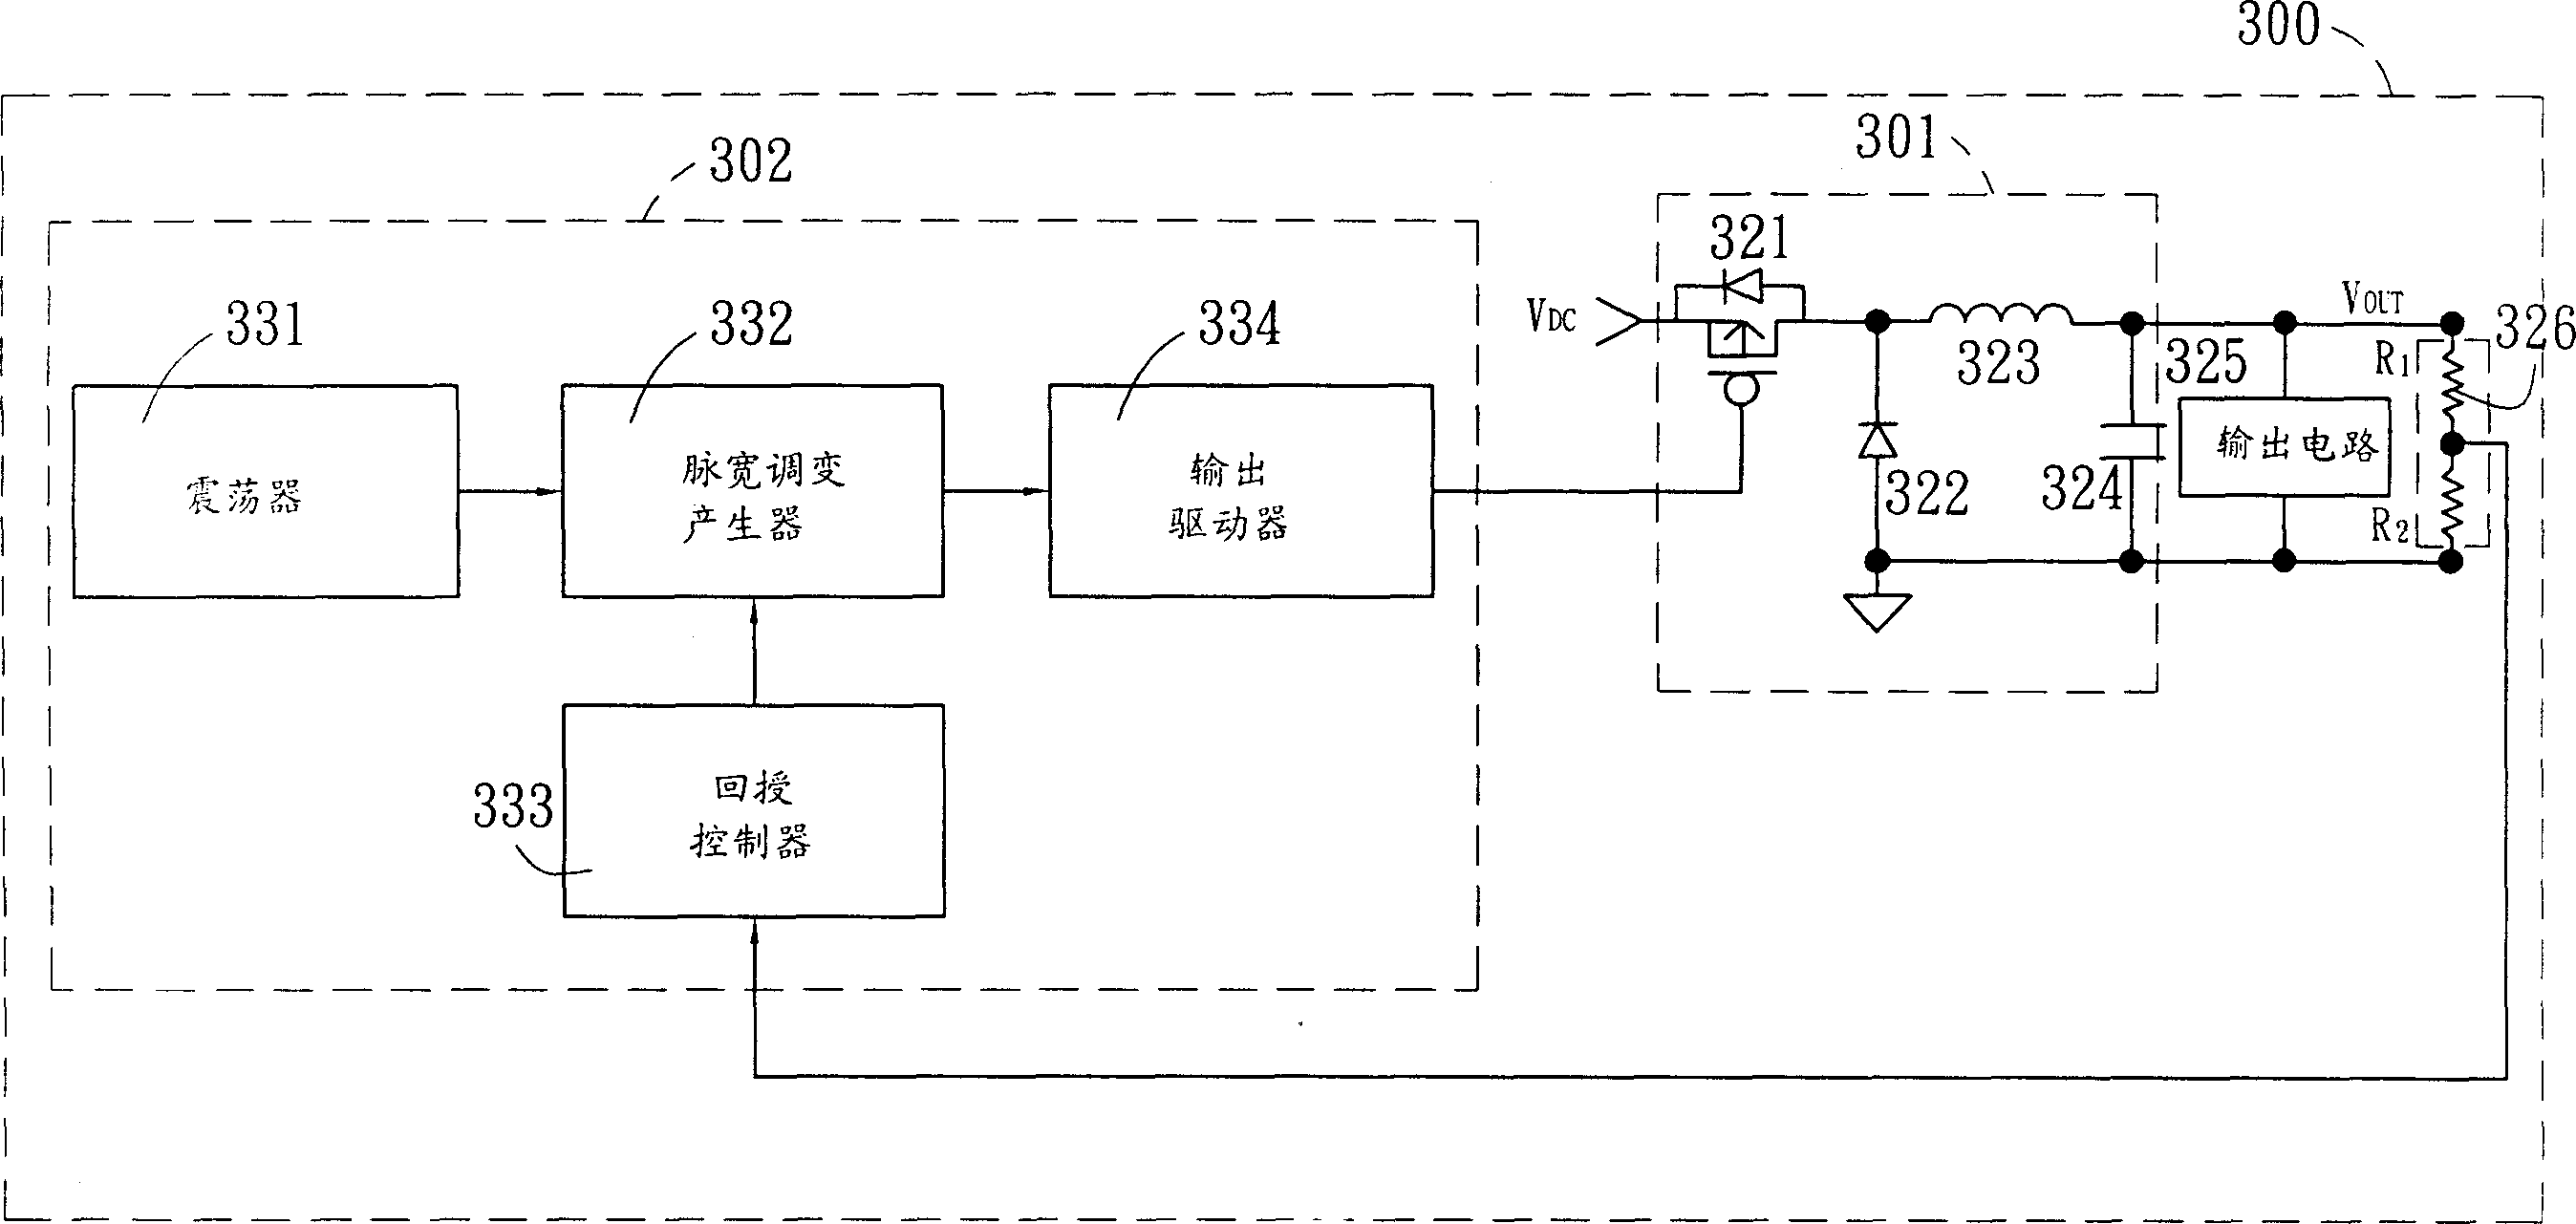 A controller, electronic circuit, display device and frequency-elimination synchronizing converter